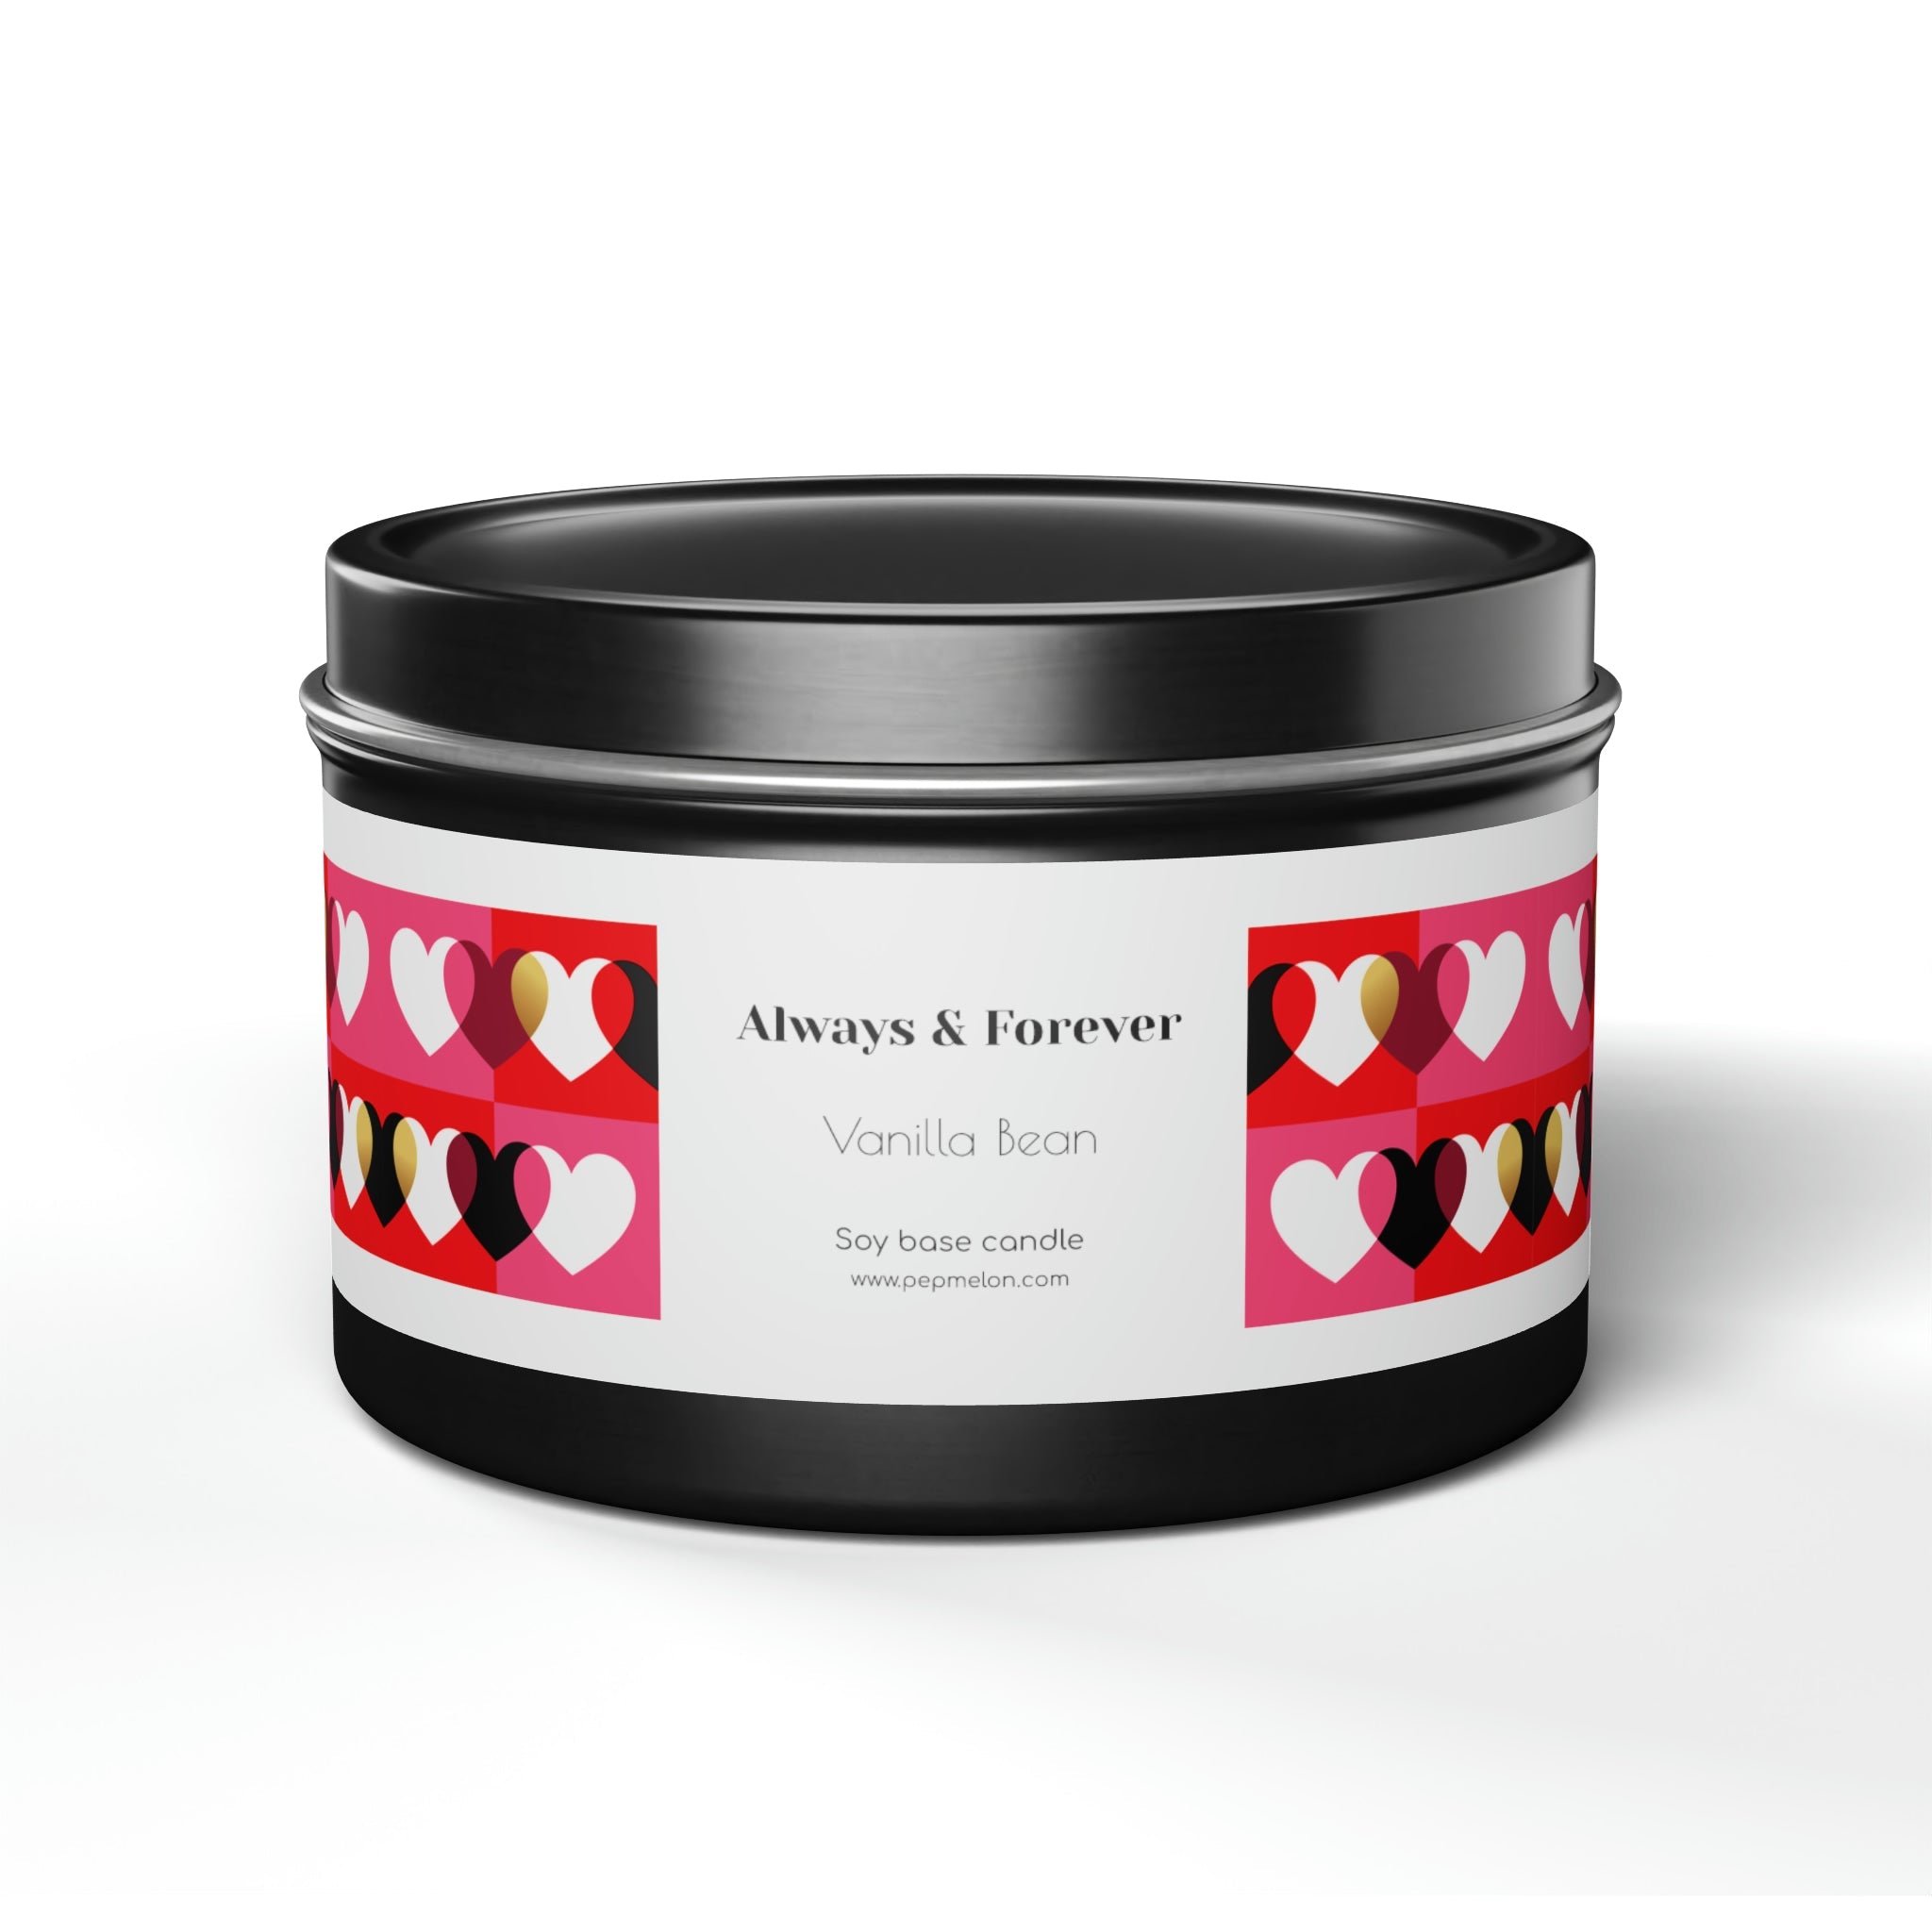 Vanilla Bean Always & Forever Soy base candle love, valentine's day gift Tin Candles-13